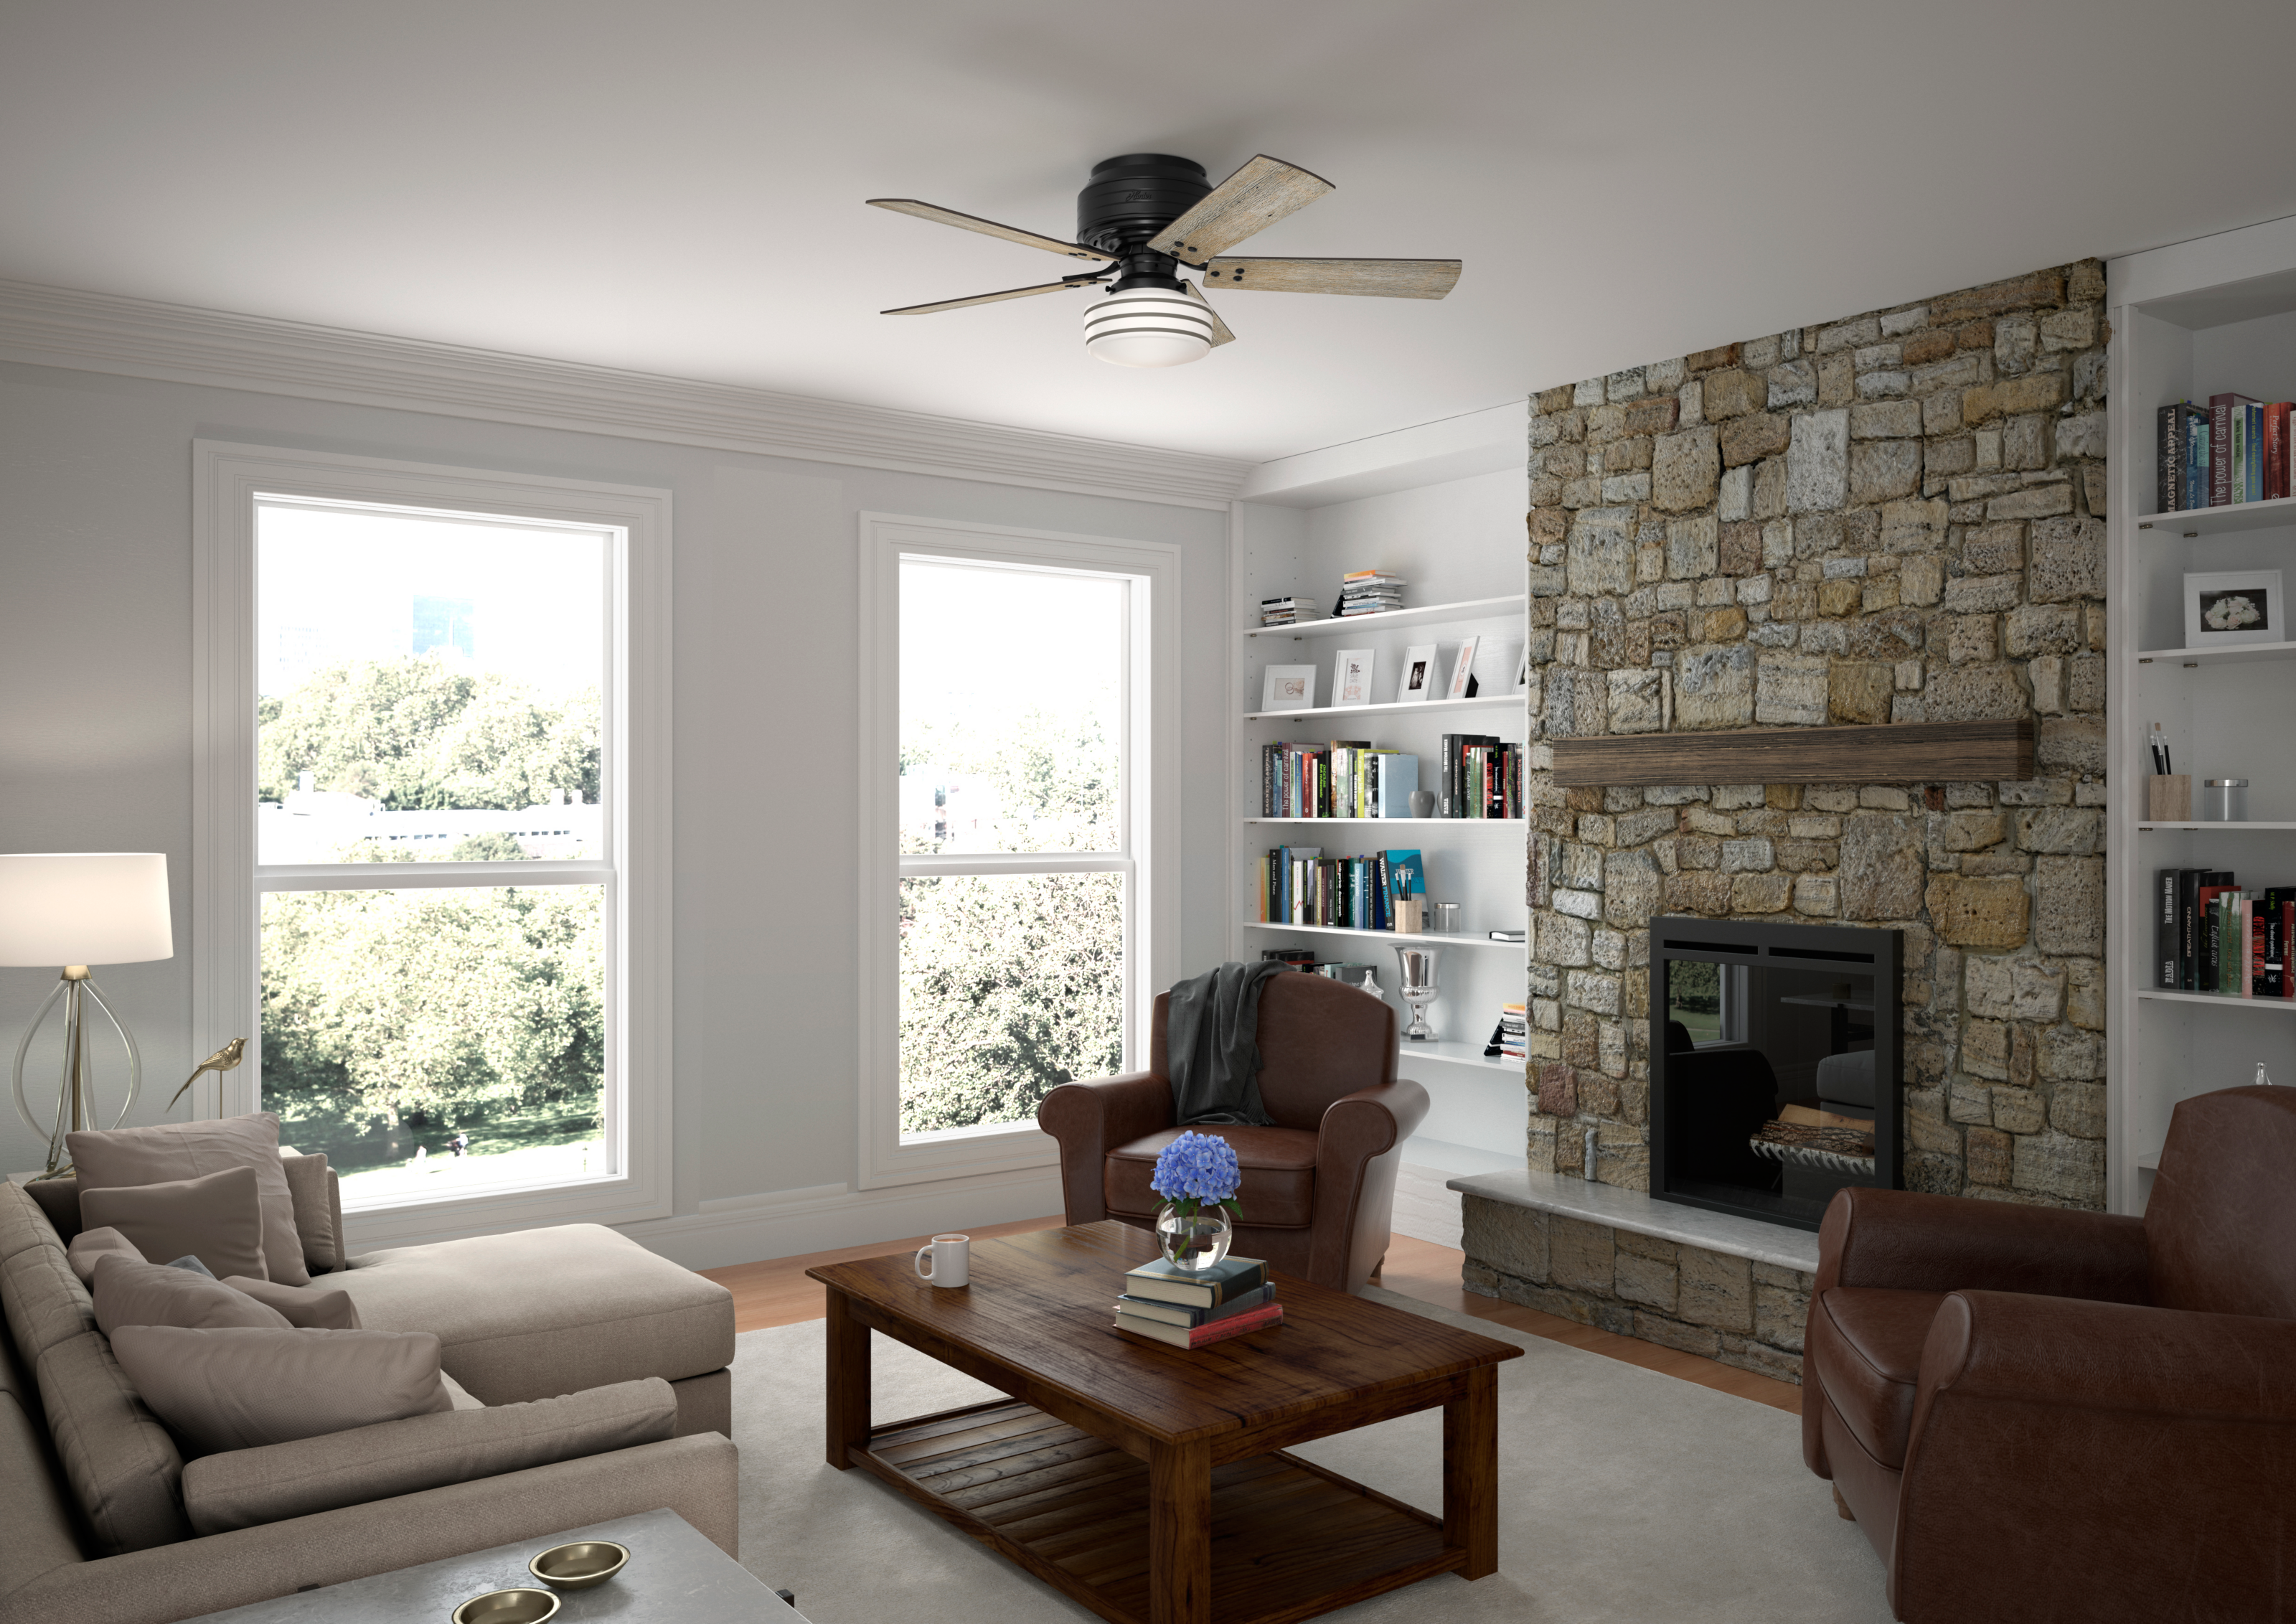 Hunter 52 inch Cedar Key Low Profile Damp Rated Ceiling Fan with LED Light Kit and Handheld Remote Ceiling Fan Hunter   